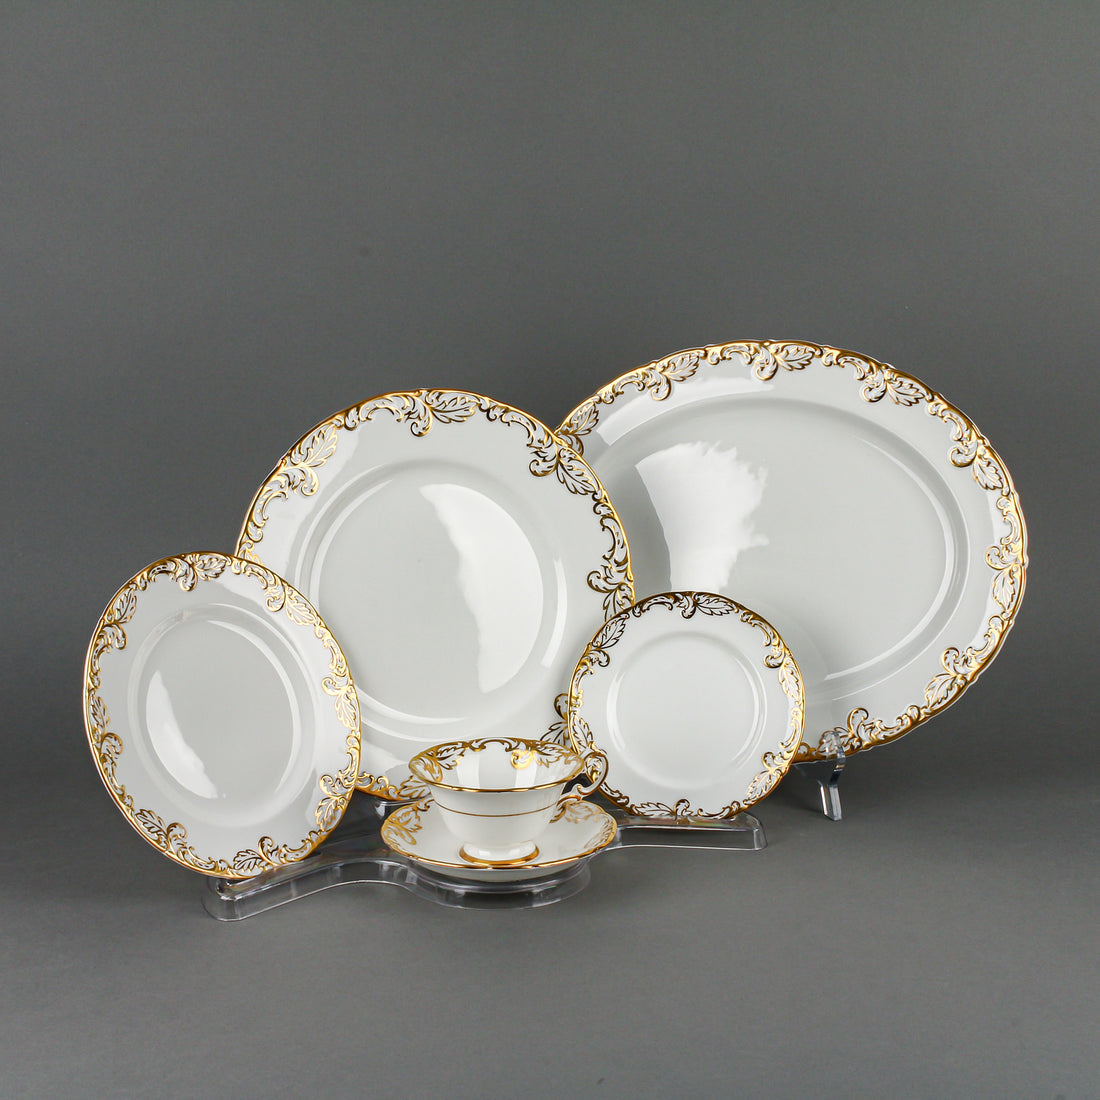 PARAGON 21293 White with Gold Trim - 12 Place Settings +